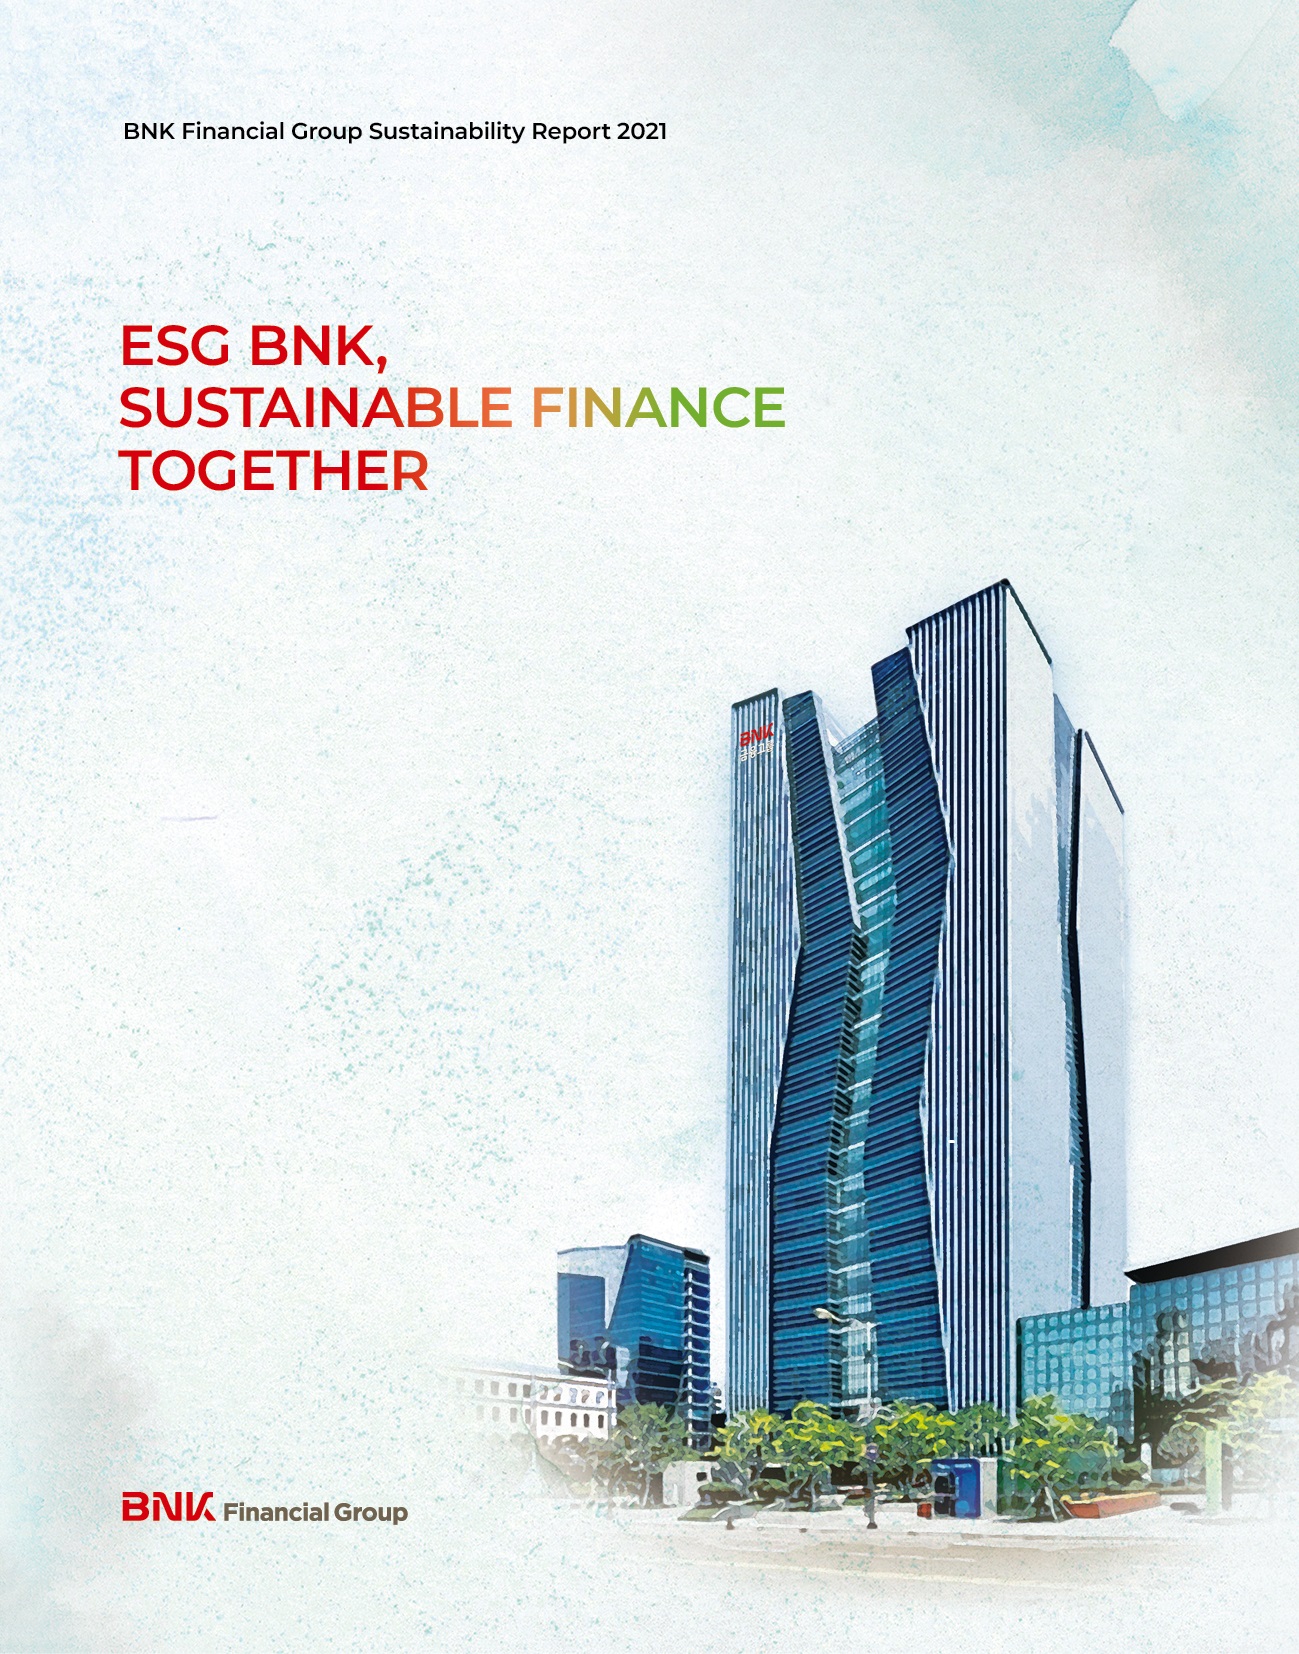  BNK Financial Group Sustainability Report 2021